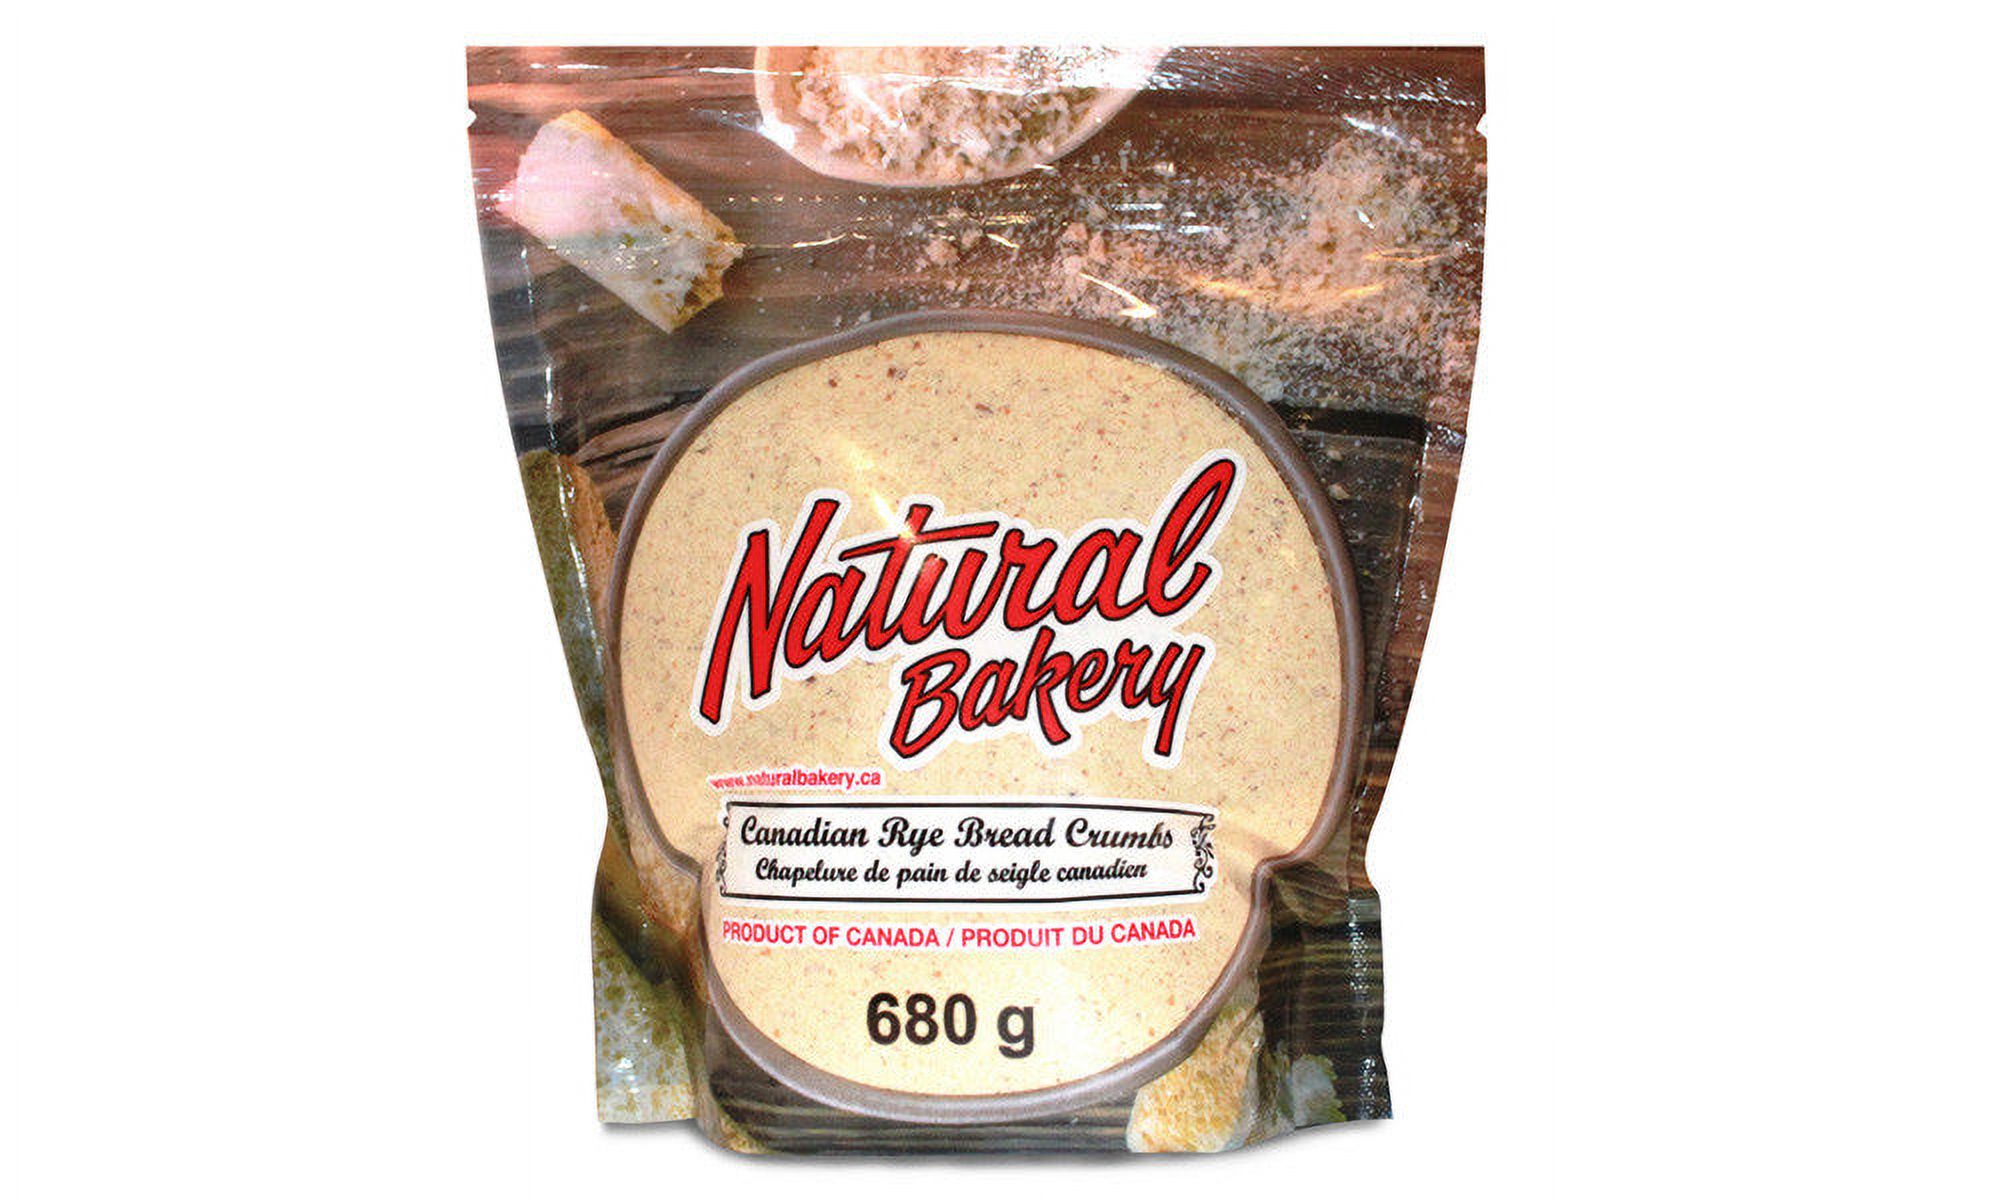 Natural Bakery, Canadian Rye Bread Crumbs, 680g/24oz., {Imported from Canada} - image 2 of 4